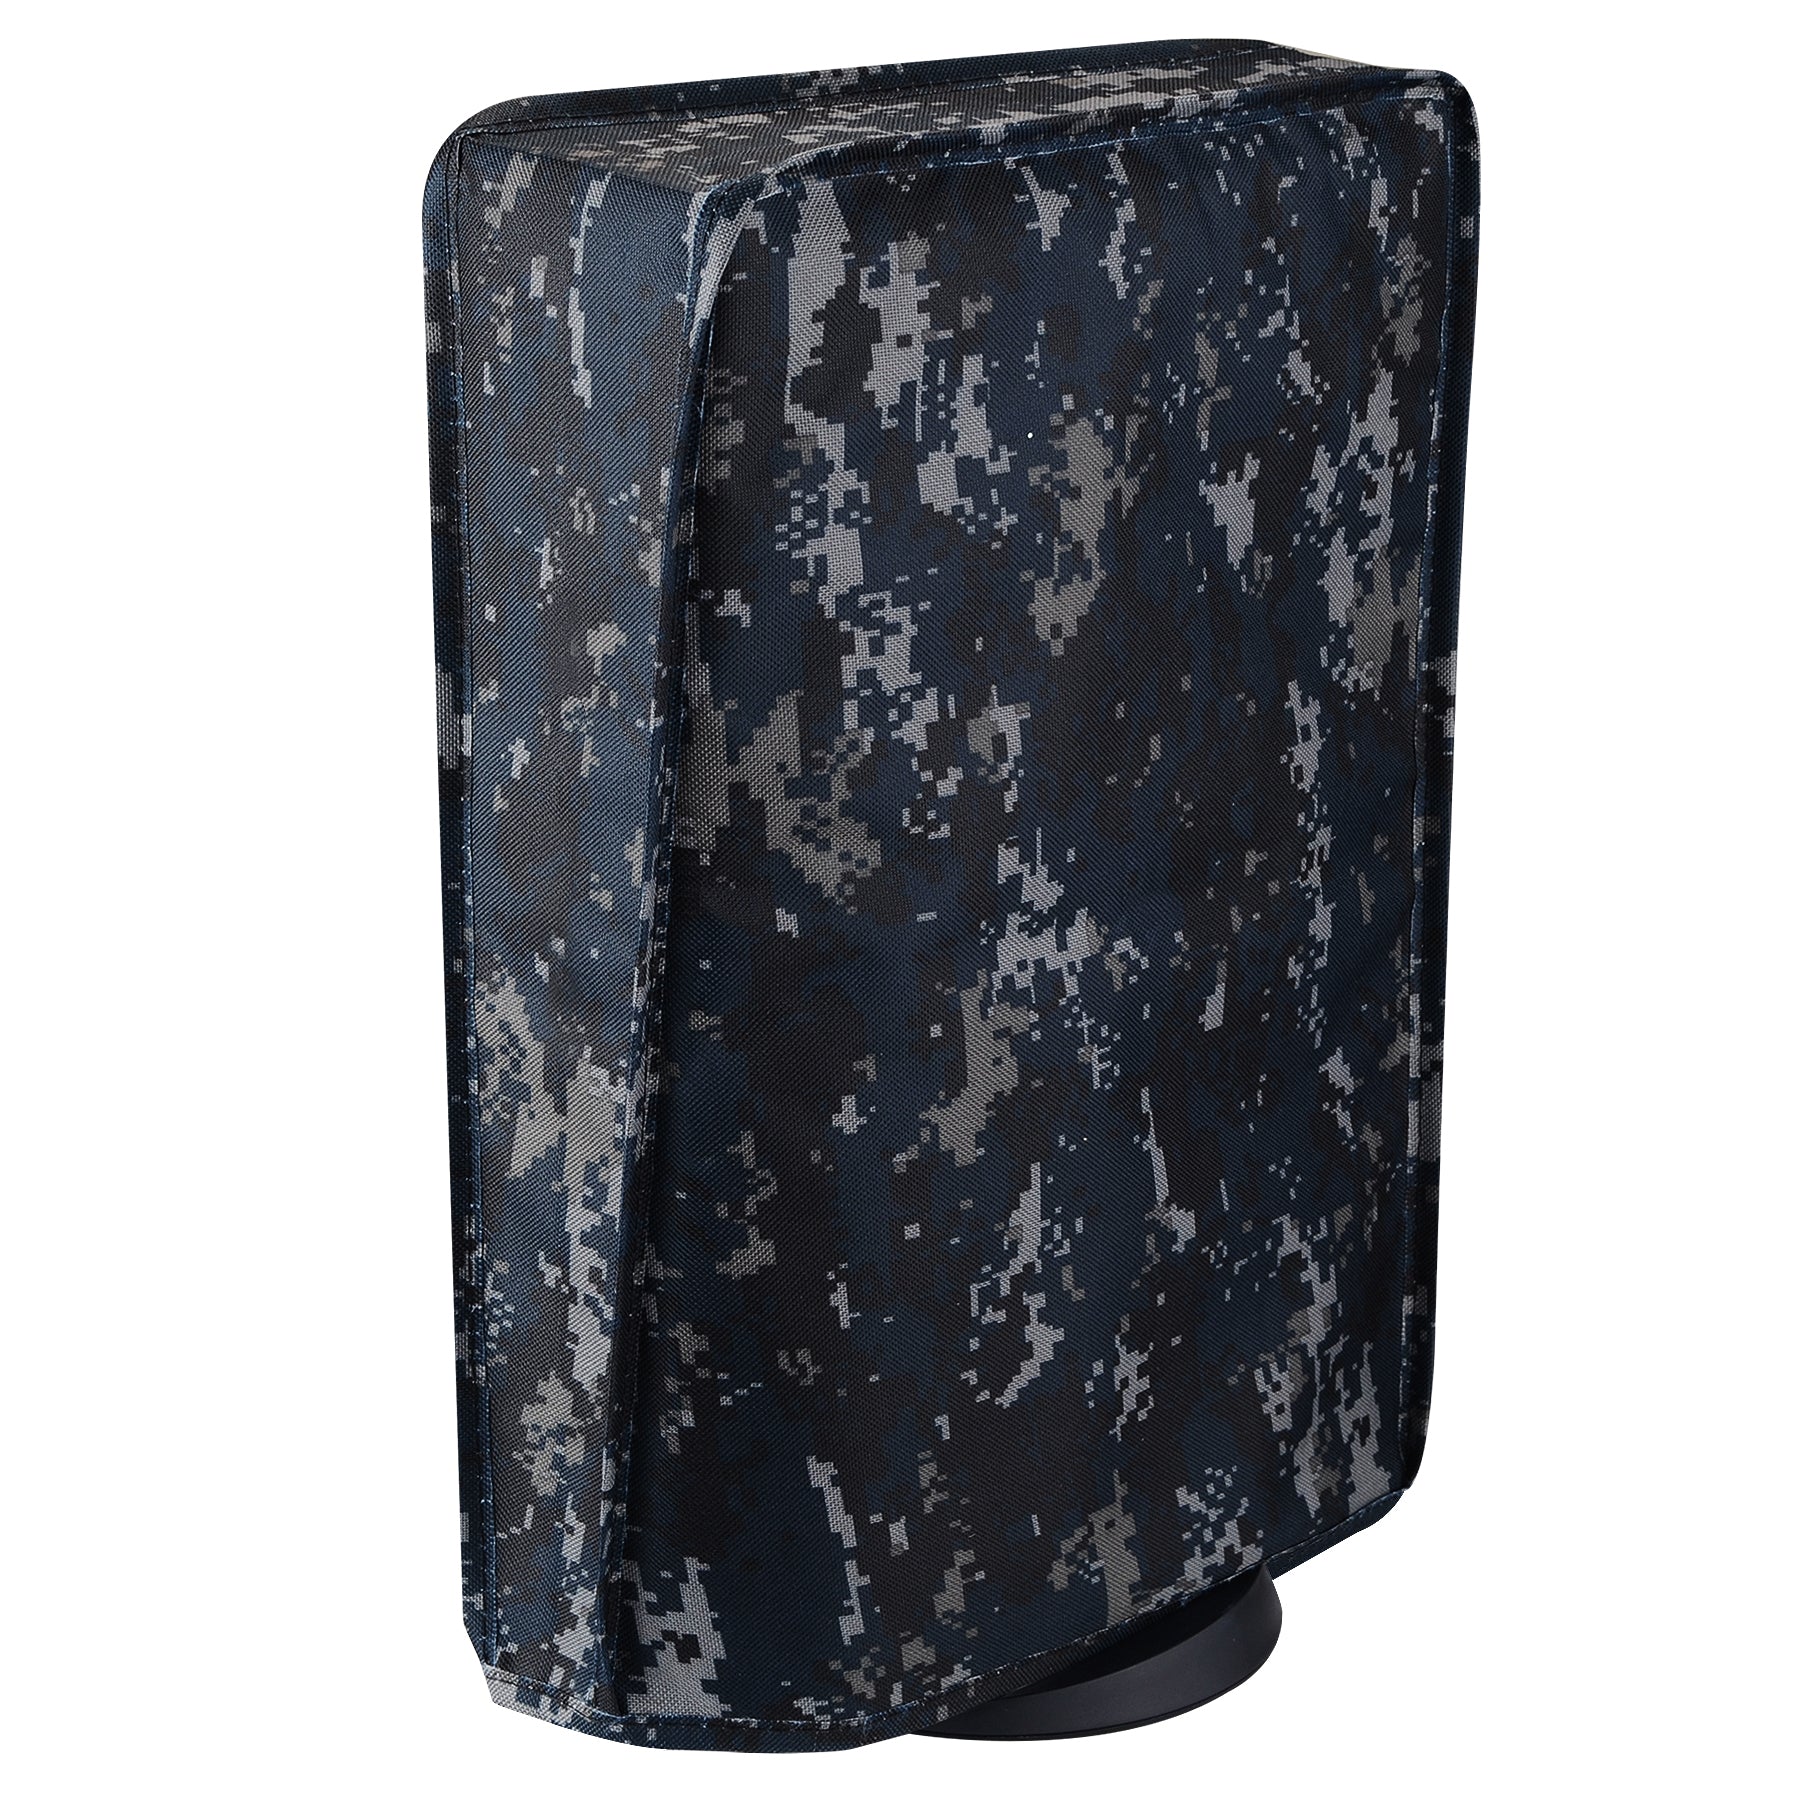 PlayVital Vertical Urban Digital Camouflage Anti Scratch Waterproof Dust Cover for ps5 Console Digital Edition & Disc Edition - PFPJ060 PlayVital